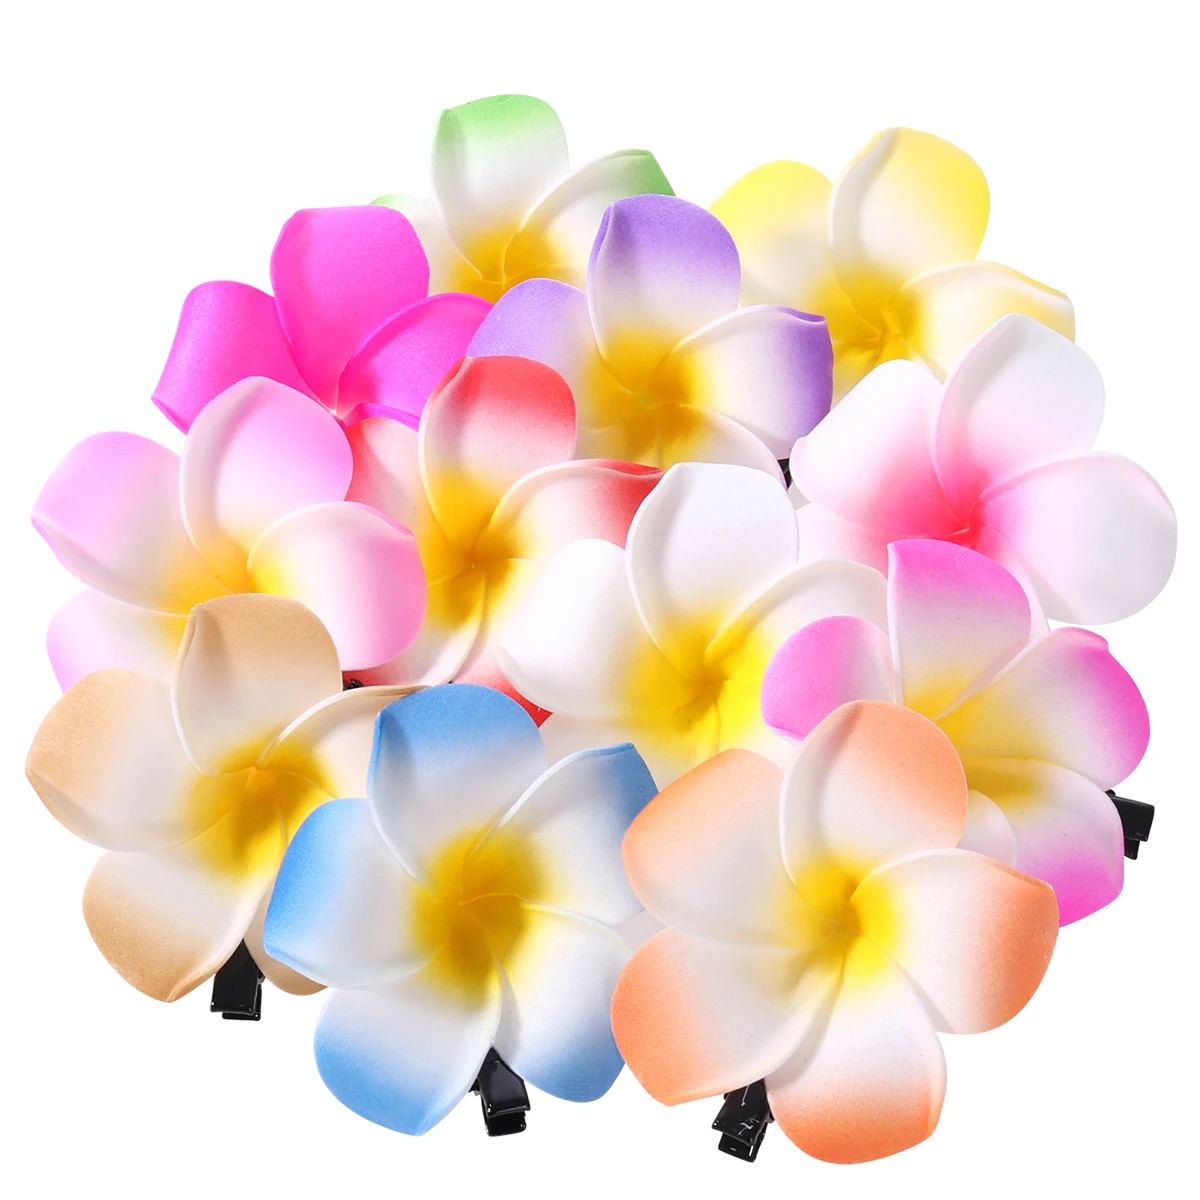 FRCOLOR 24Pcs 2.4 Inch Hawaiian Plumeria Flower Hair Clip Hair Accessory for Beach Party Wedding Event Decoration(12 Colors) e china supplier customize beach bicycle 7 speed bikecycle 26 inch cycle fatbike bici mtb fat wide tyre mud mountain bikecustom